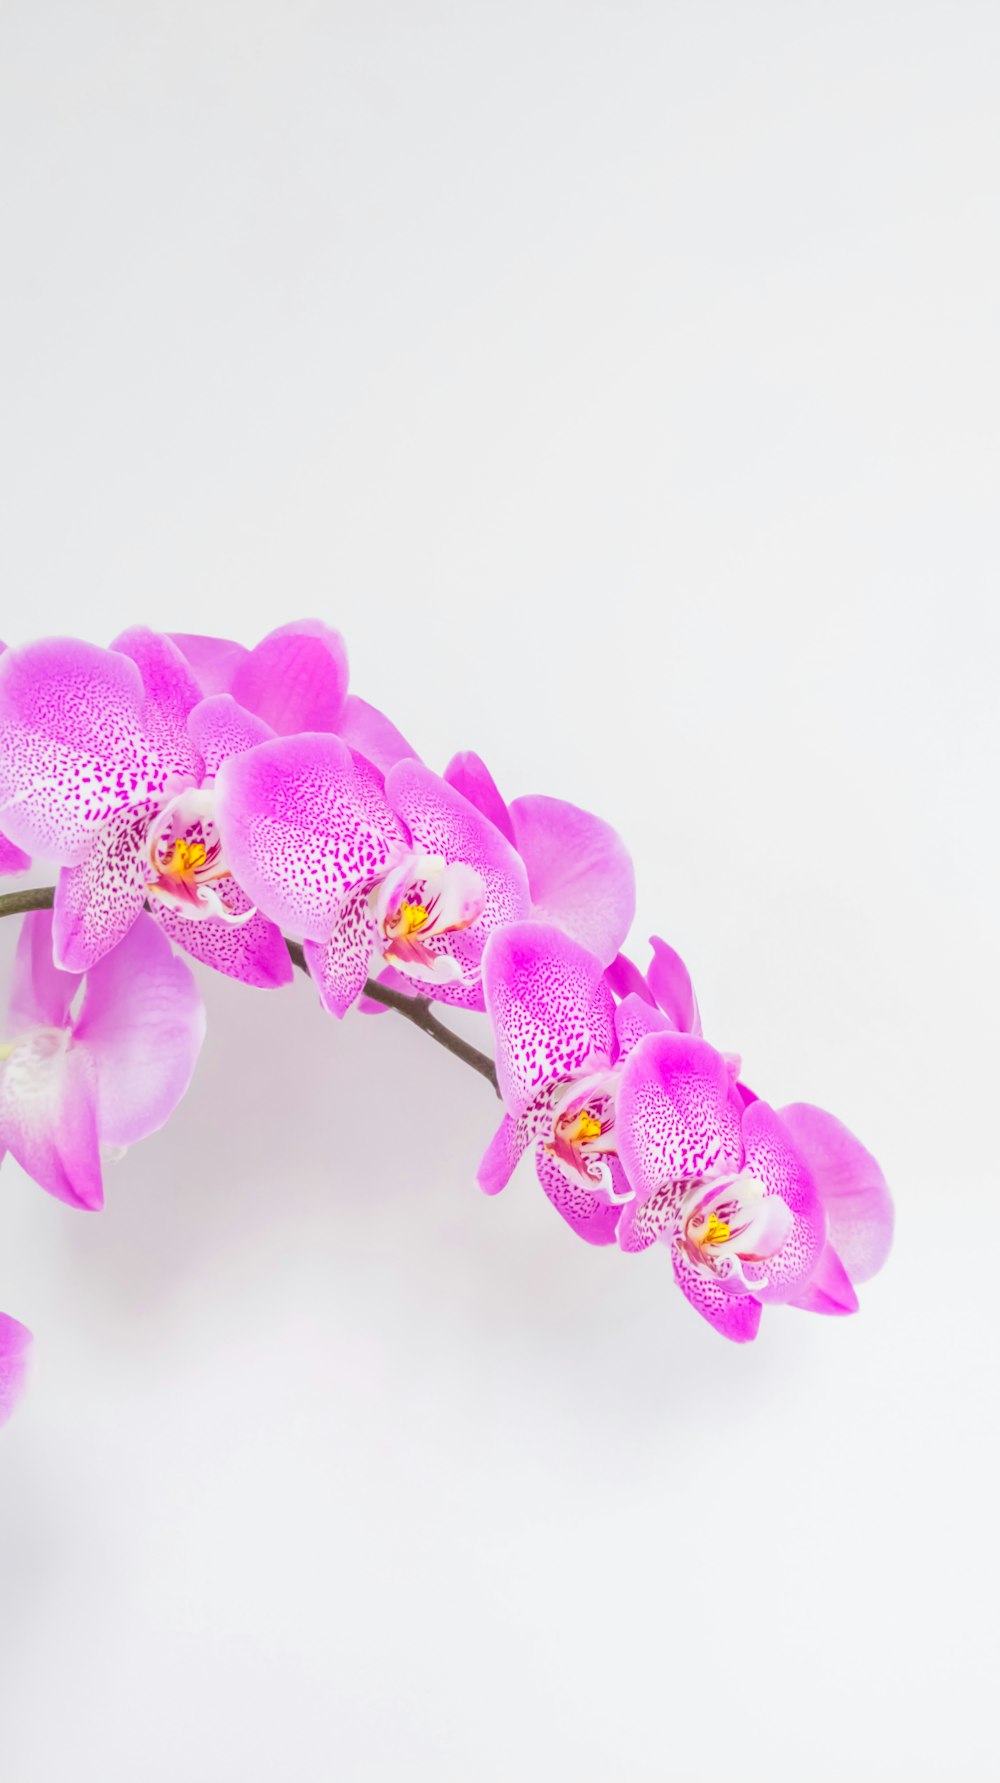 purple moth orchids in bloom close up photo